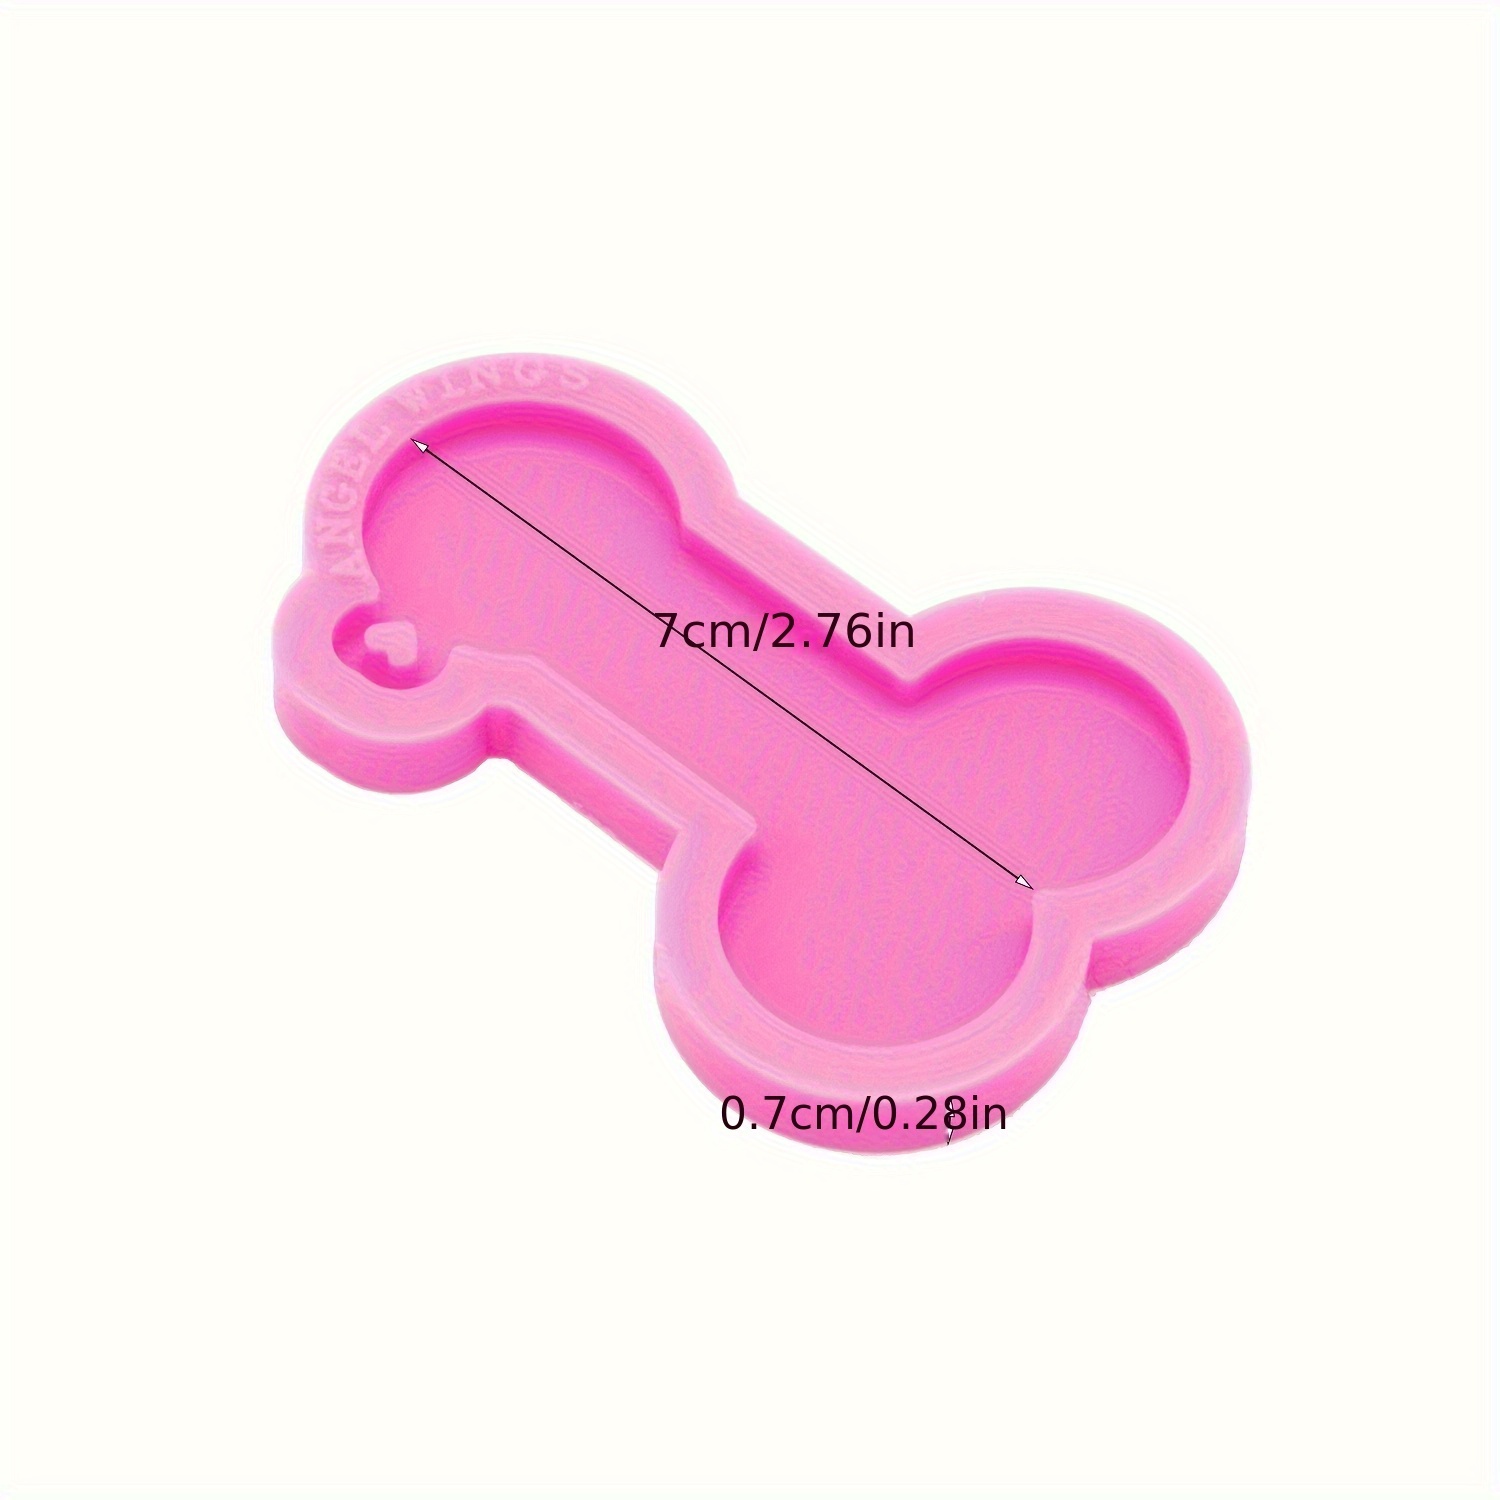 1pc Silicone Penis Molds For DIY Resin Casting Keychains Crafts, DIY Baking  Tool